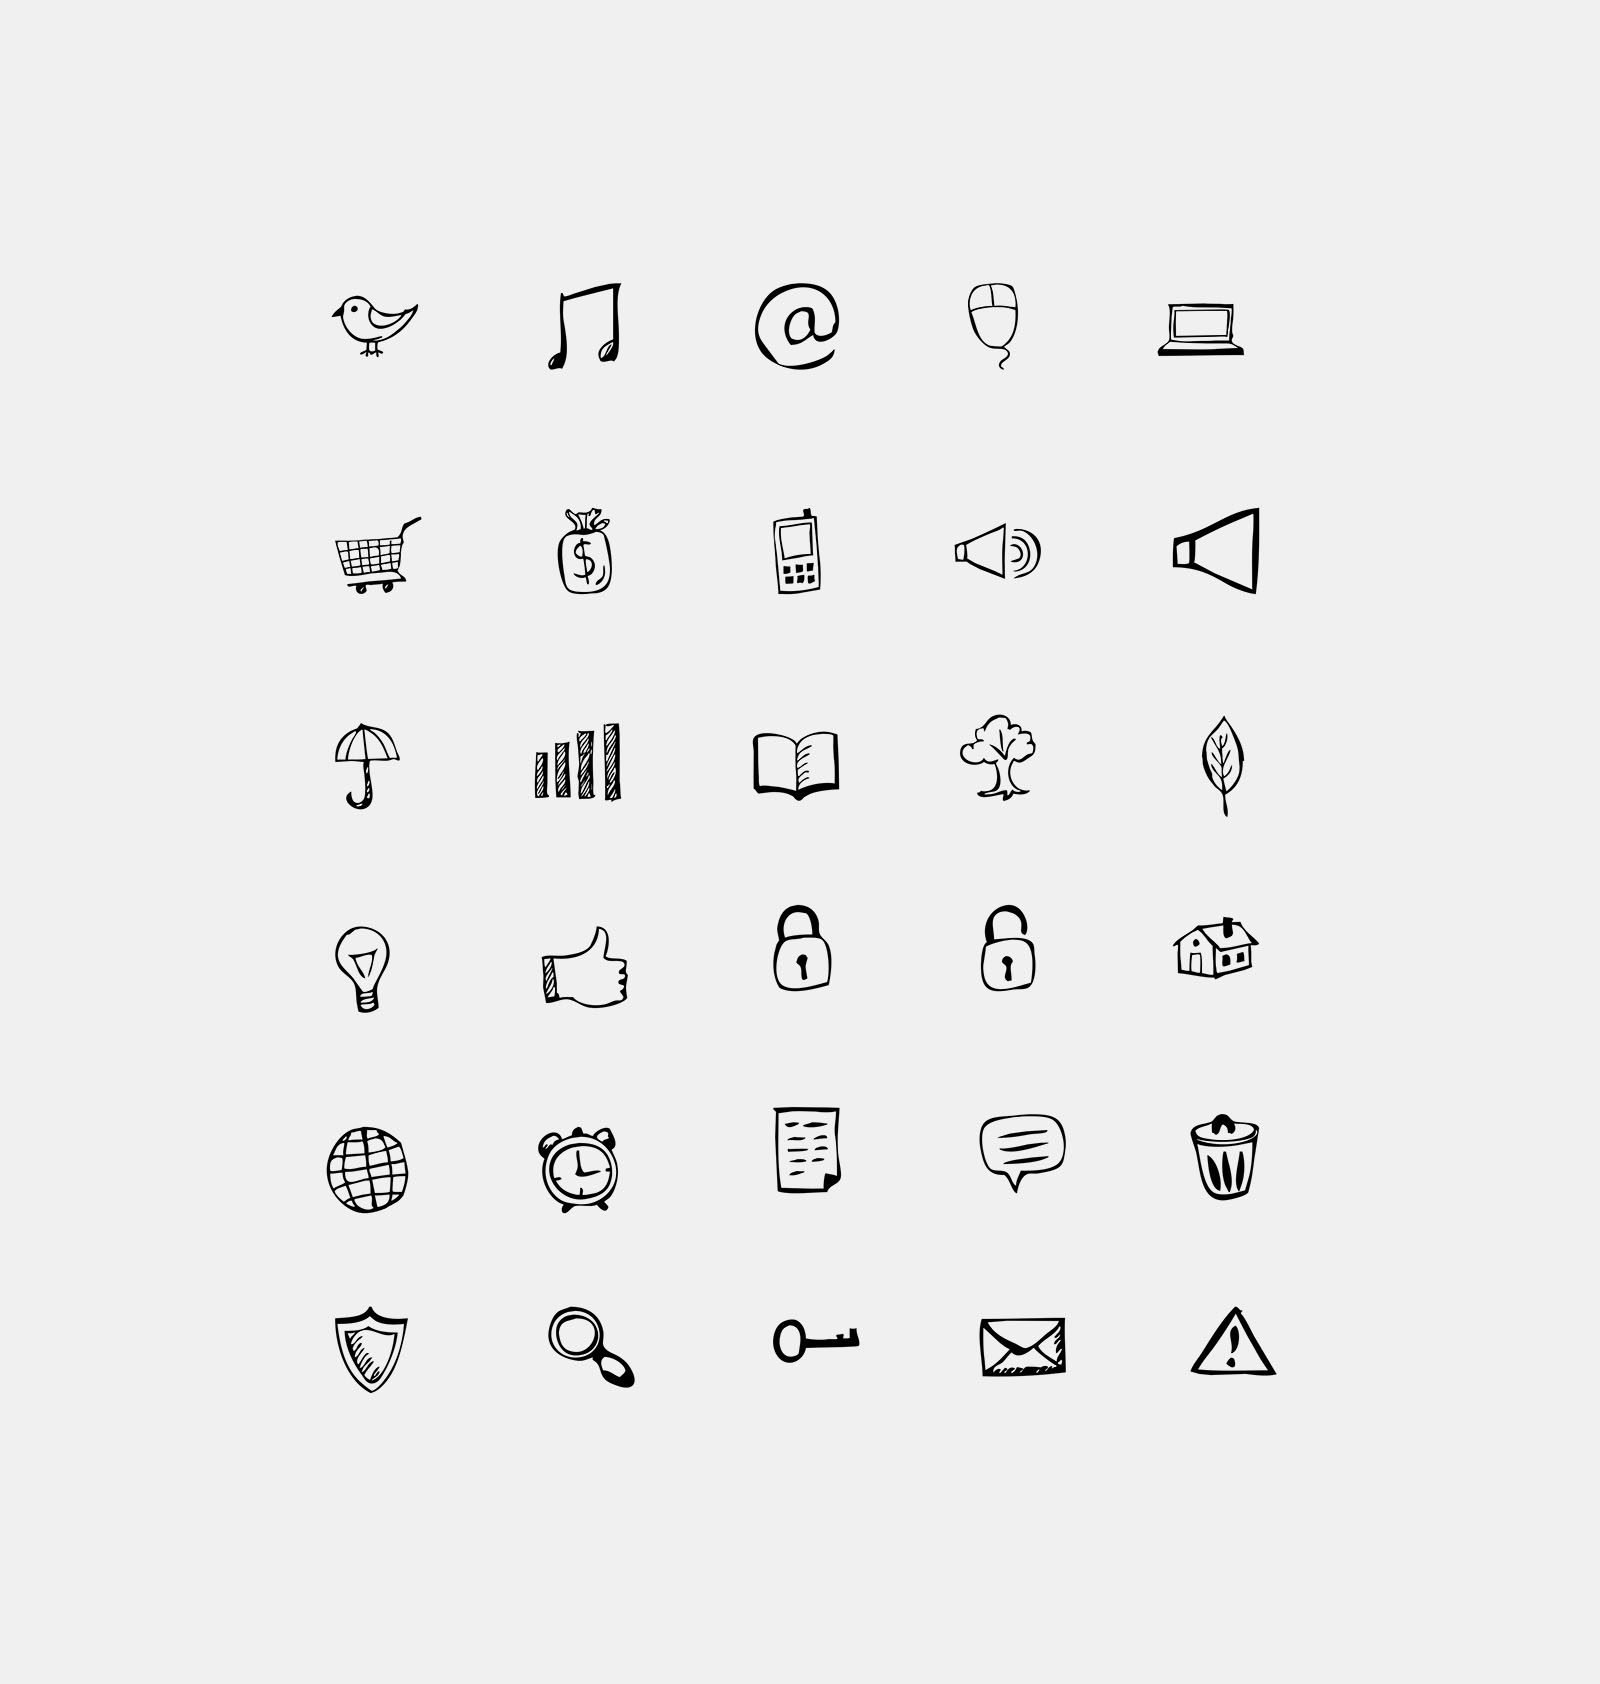 Hand drawn icons and PS shapes